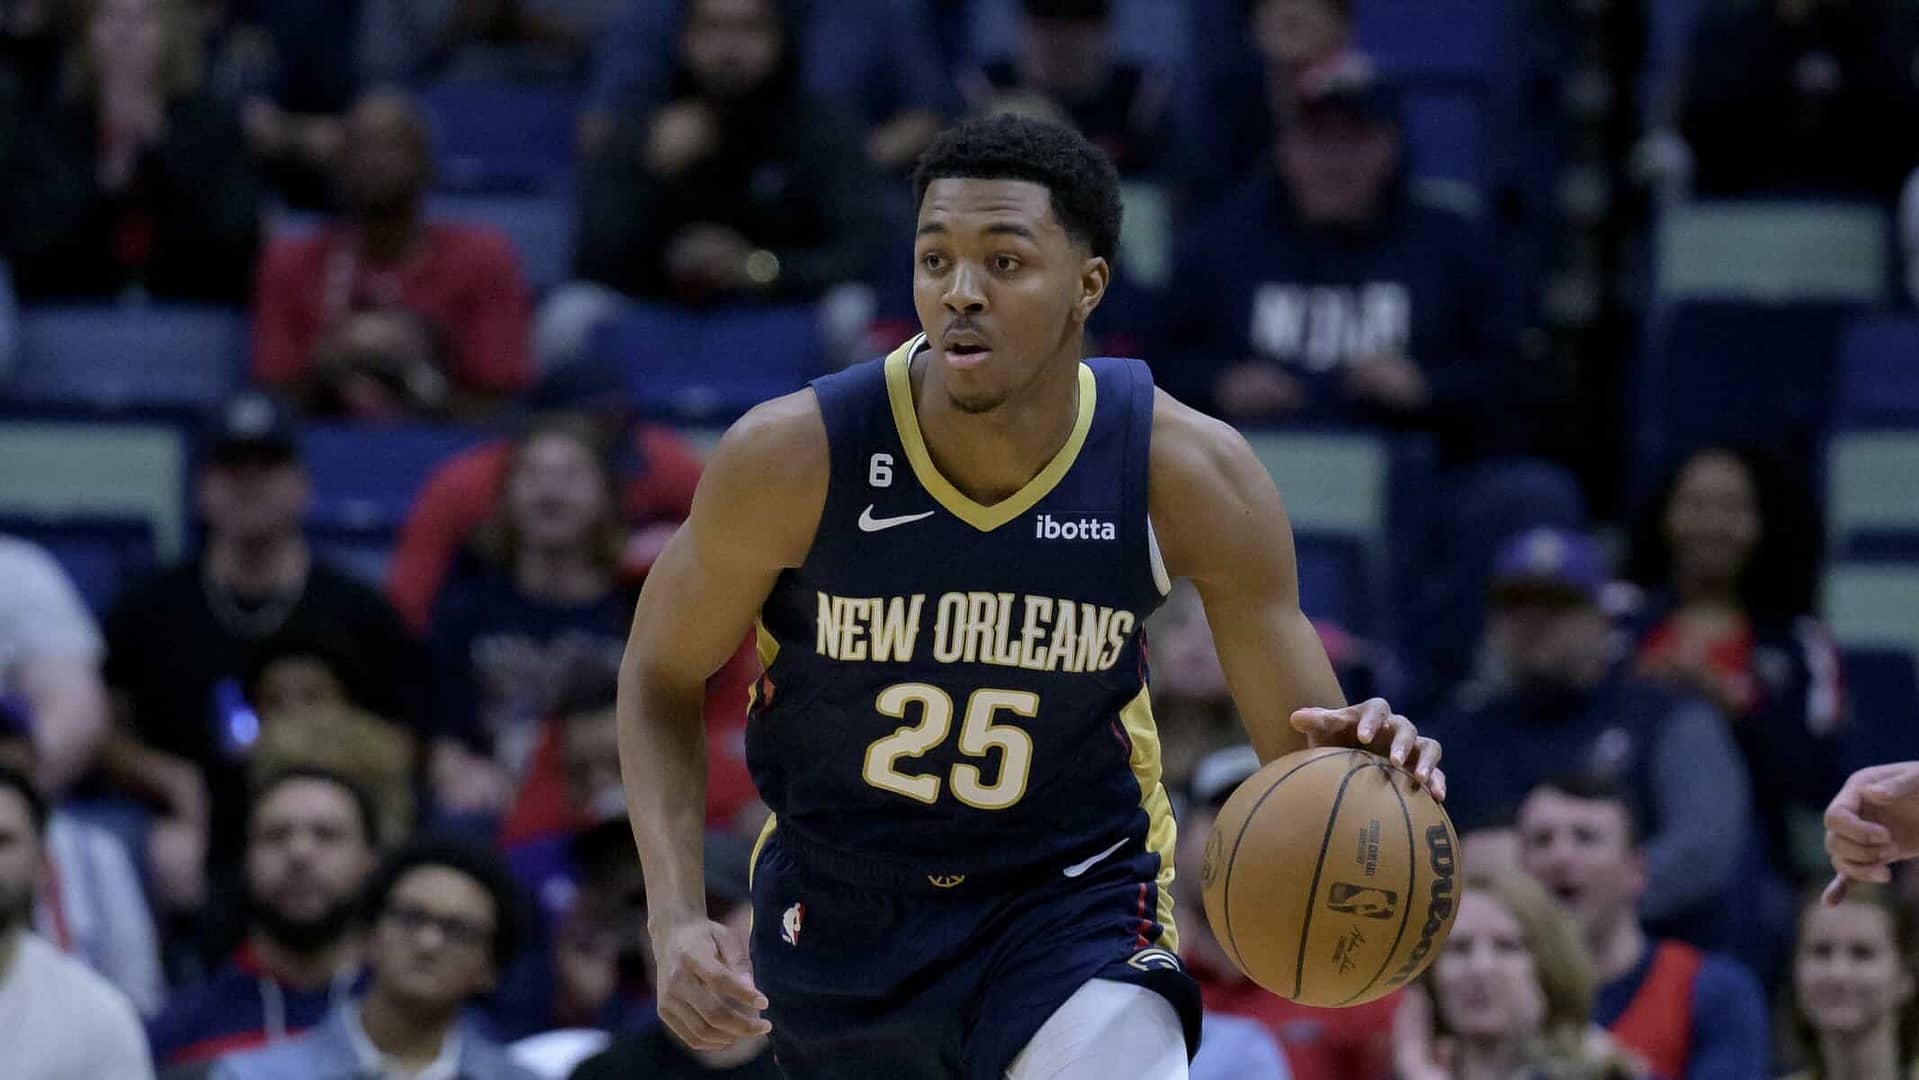 New Orleans visits Toronto on Thursday, and an NBA Pelicans-Raptors player prop involving Trey Murphy III's scoring has value...